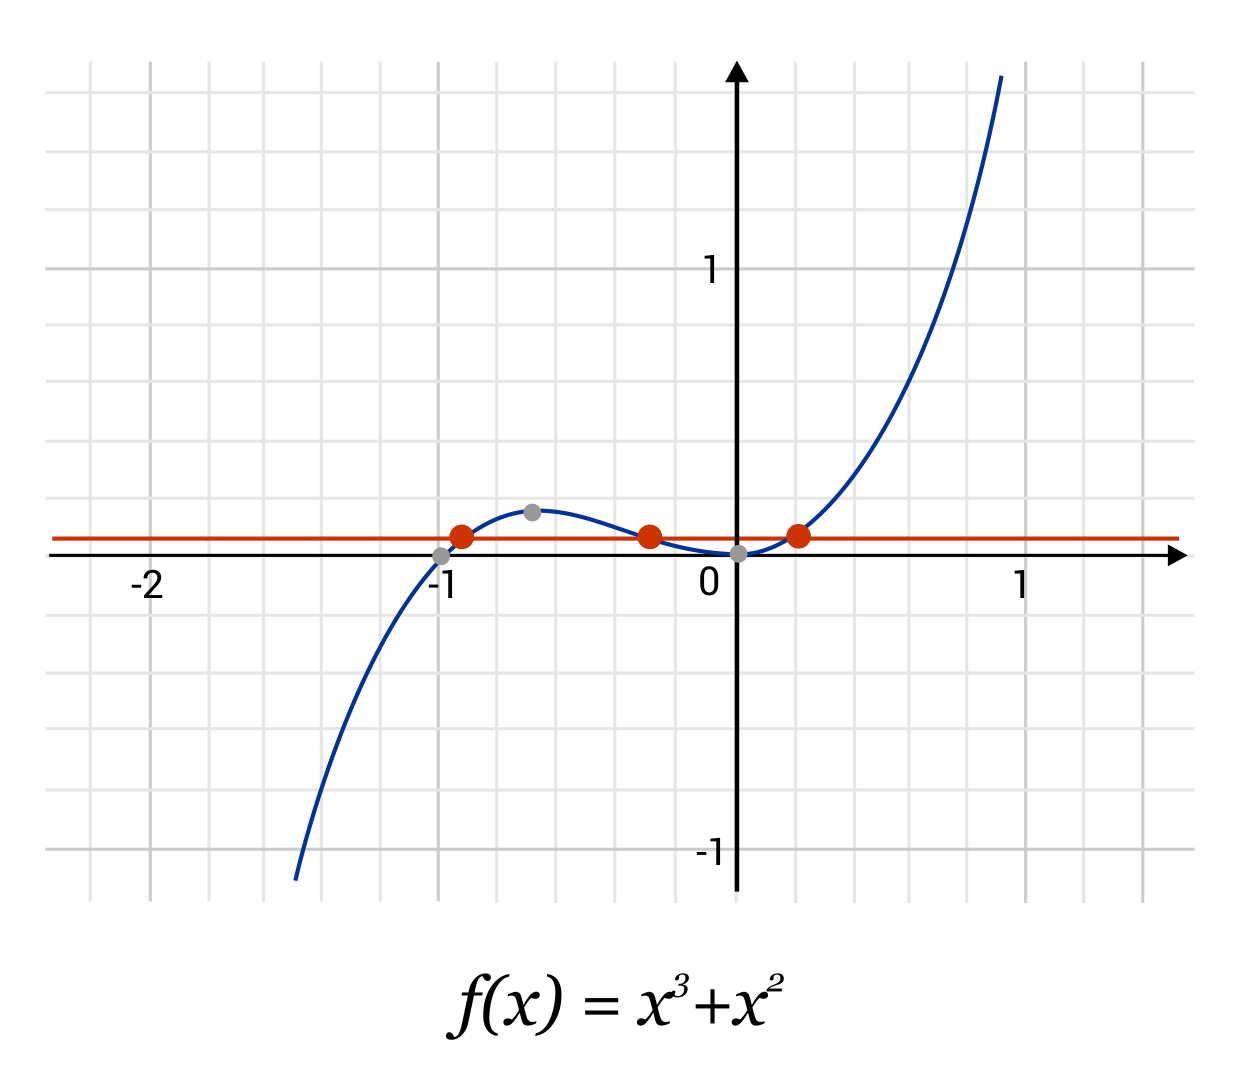 graph of f(x) equals x cubed plus x squared